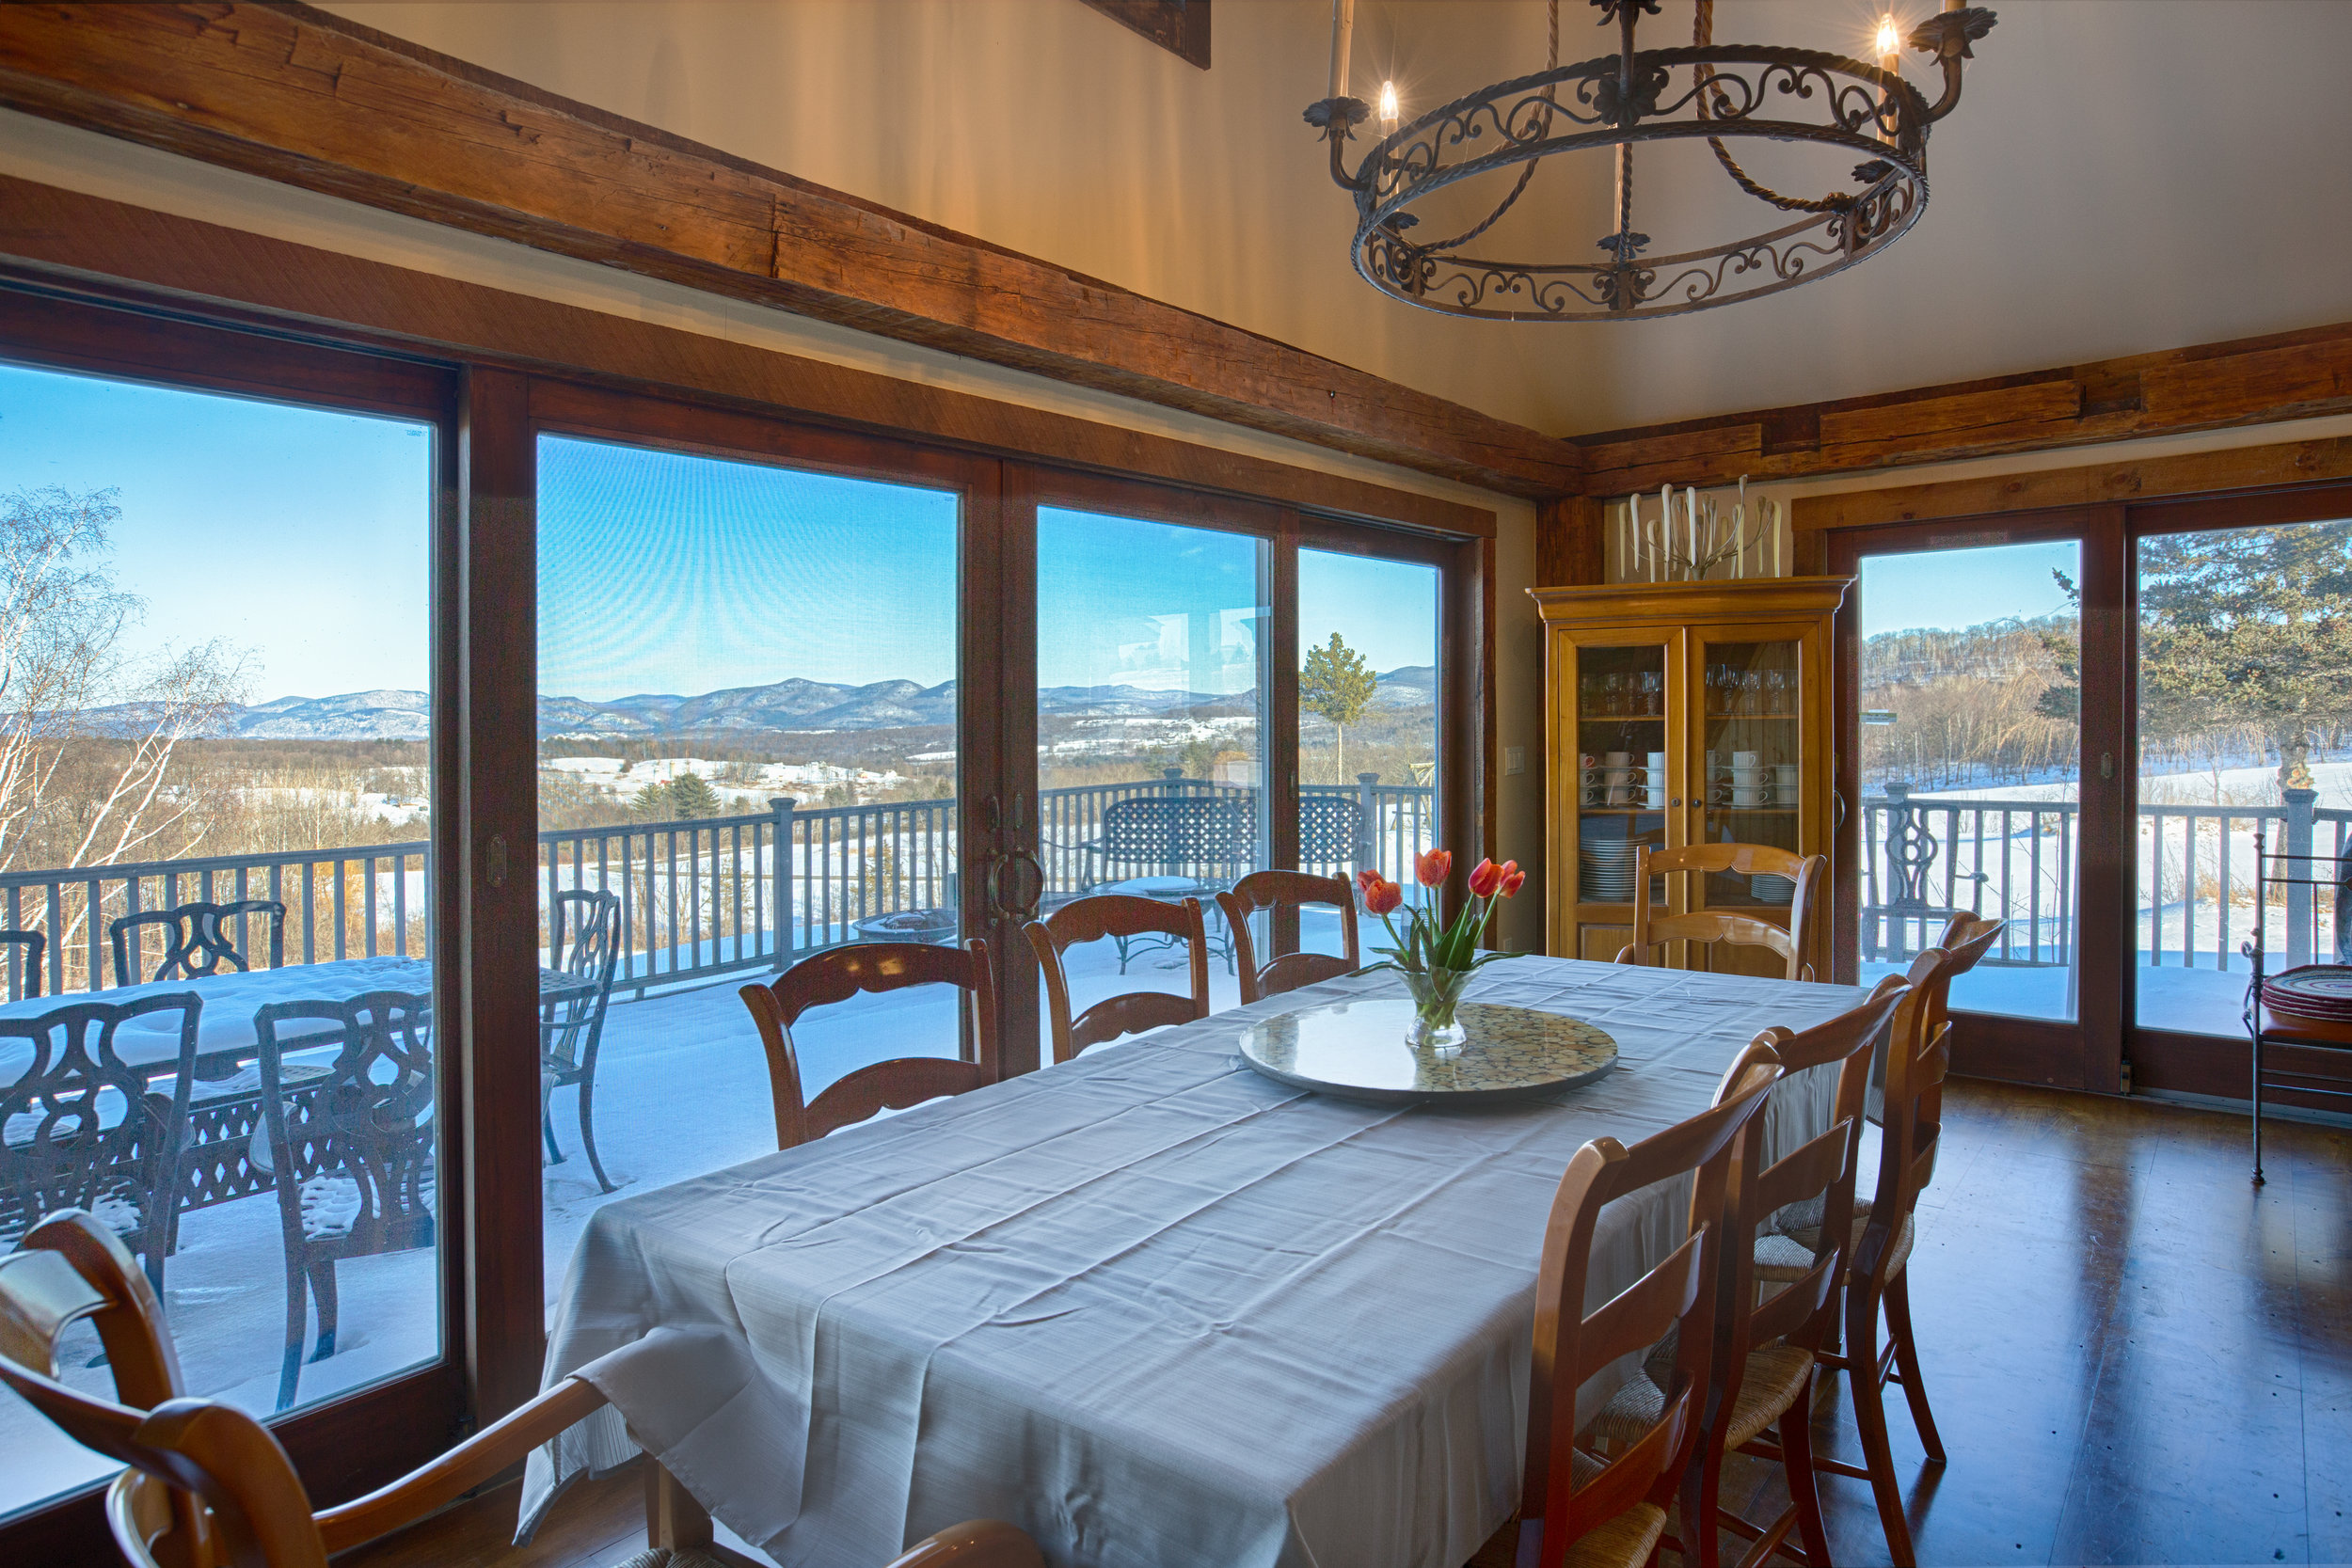  Wide open view looking into dining room. Dining room walls are lined with floor to ceiling windows that overlook a deck with a Mountain View. There is a table in the center of the dining room with multiple chairs and an armour tucked in the corner o